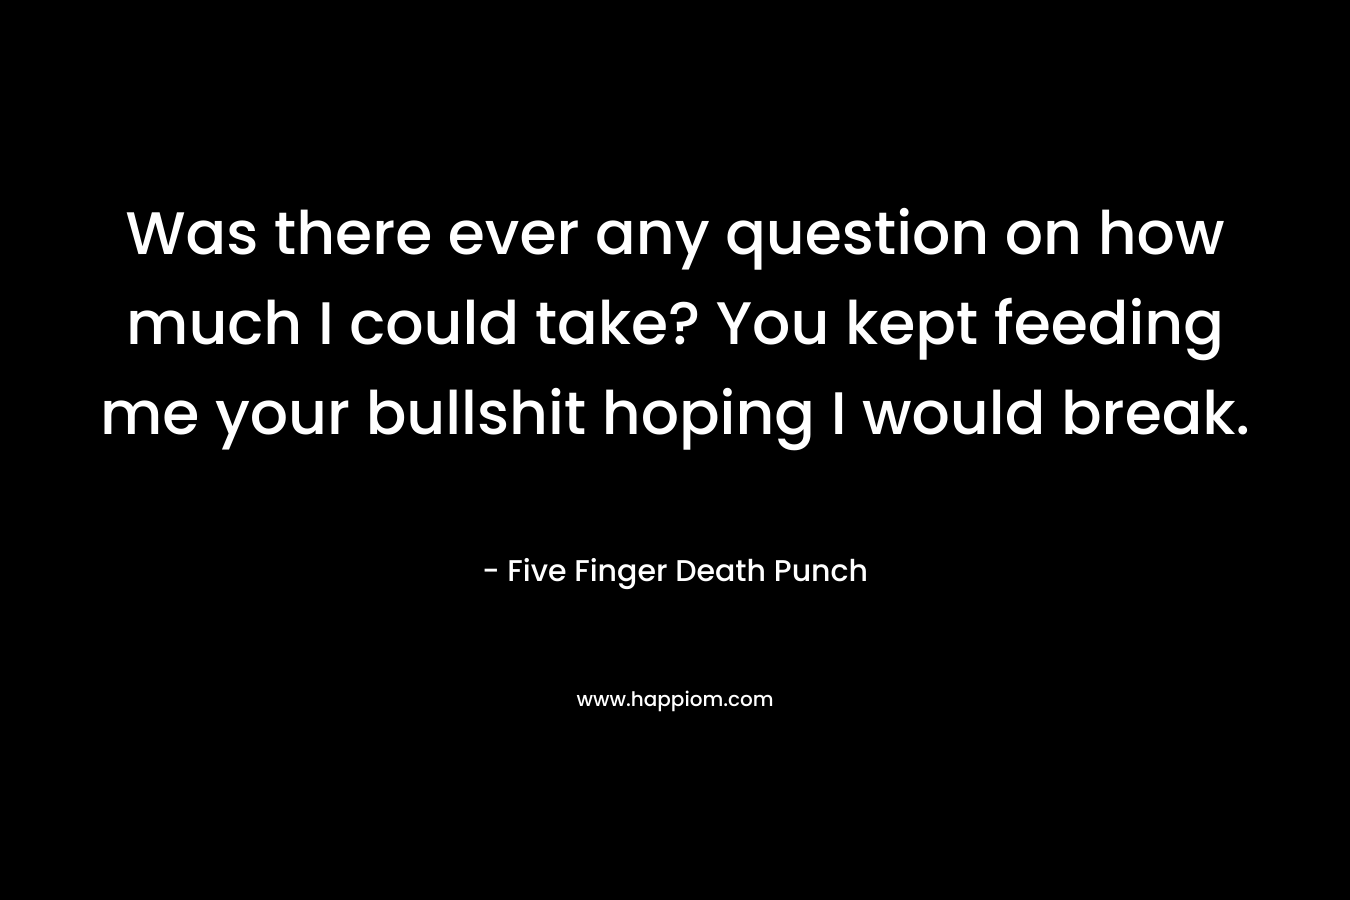 Was there ever any question on how much I could take? You kept feeding me your bullshit hoping I would break. – Five Finger Death Punch